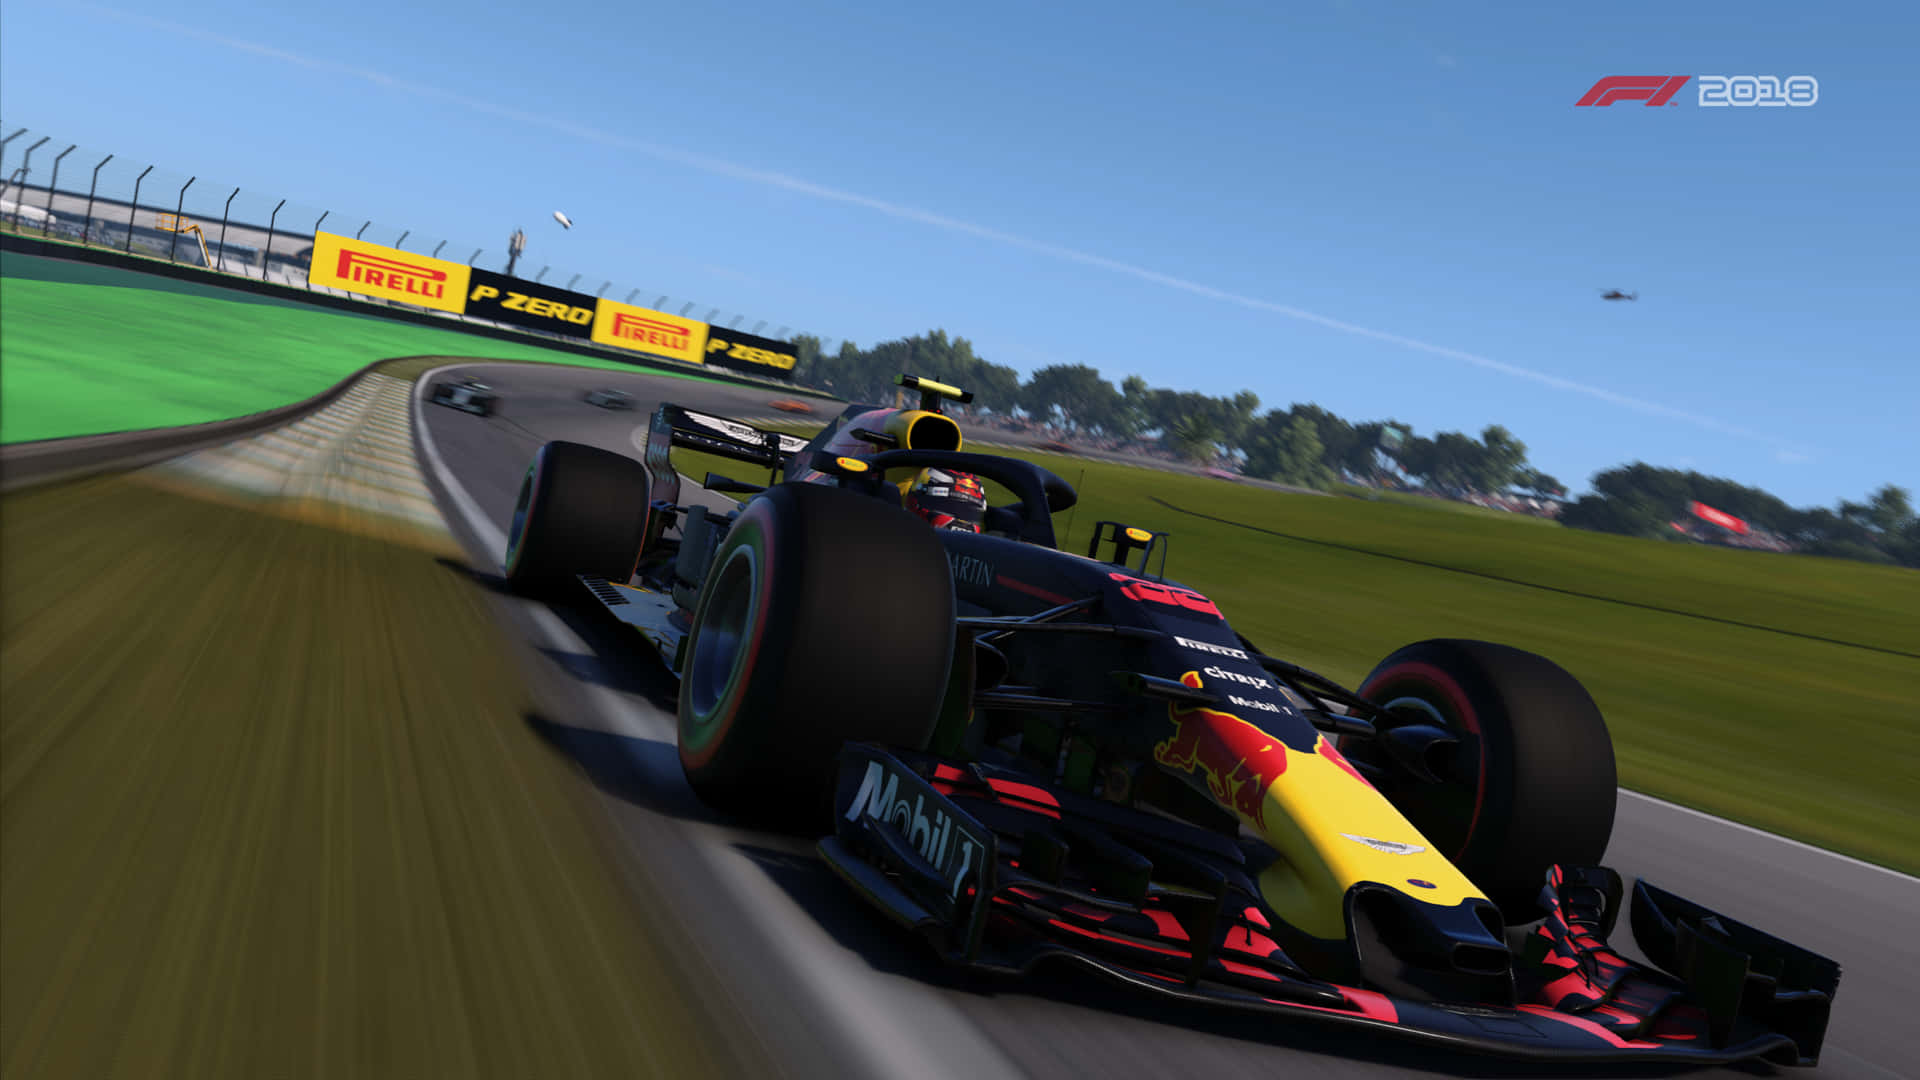 rev up your engines- F1 2018 is here